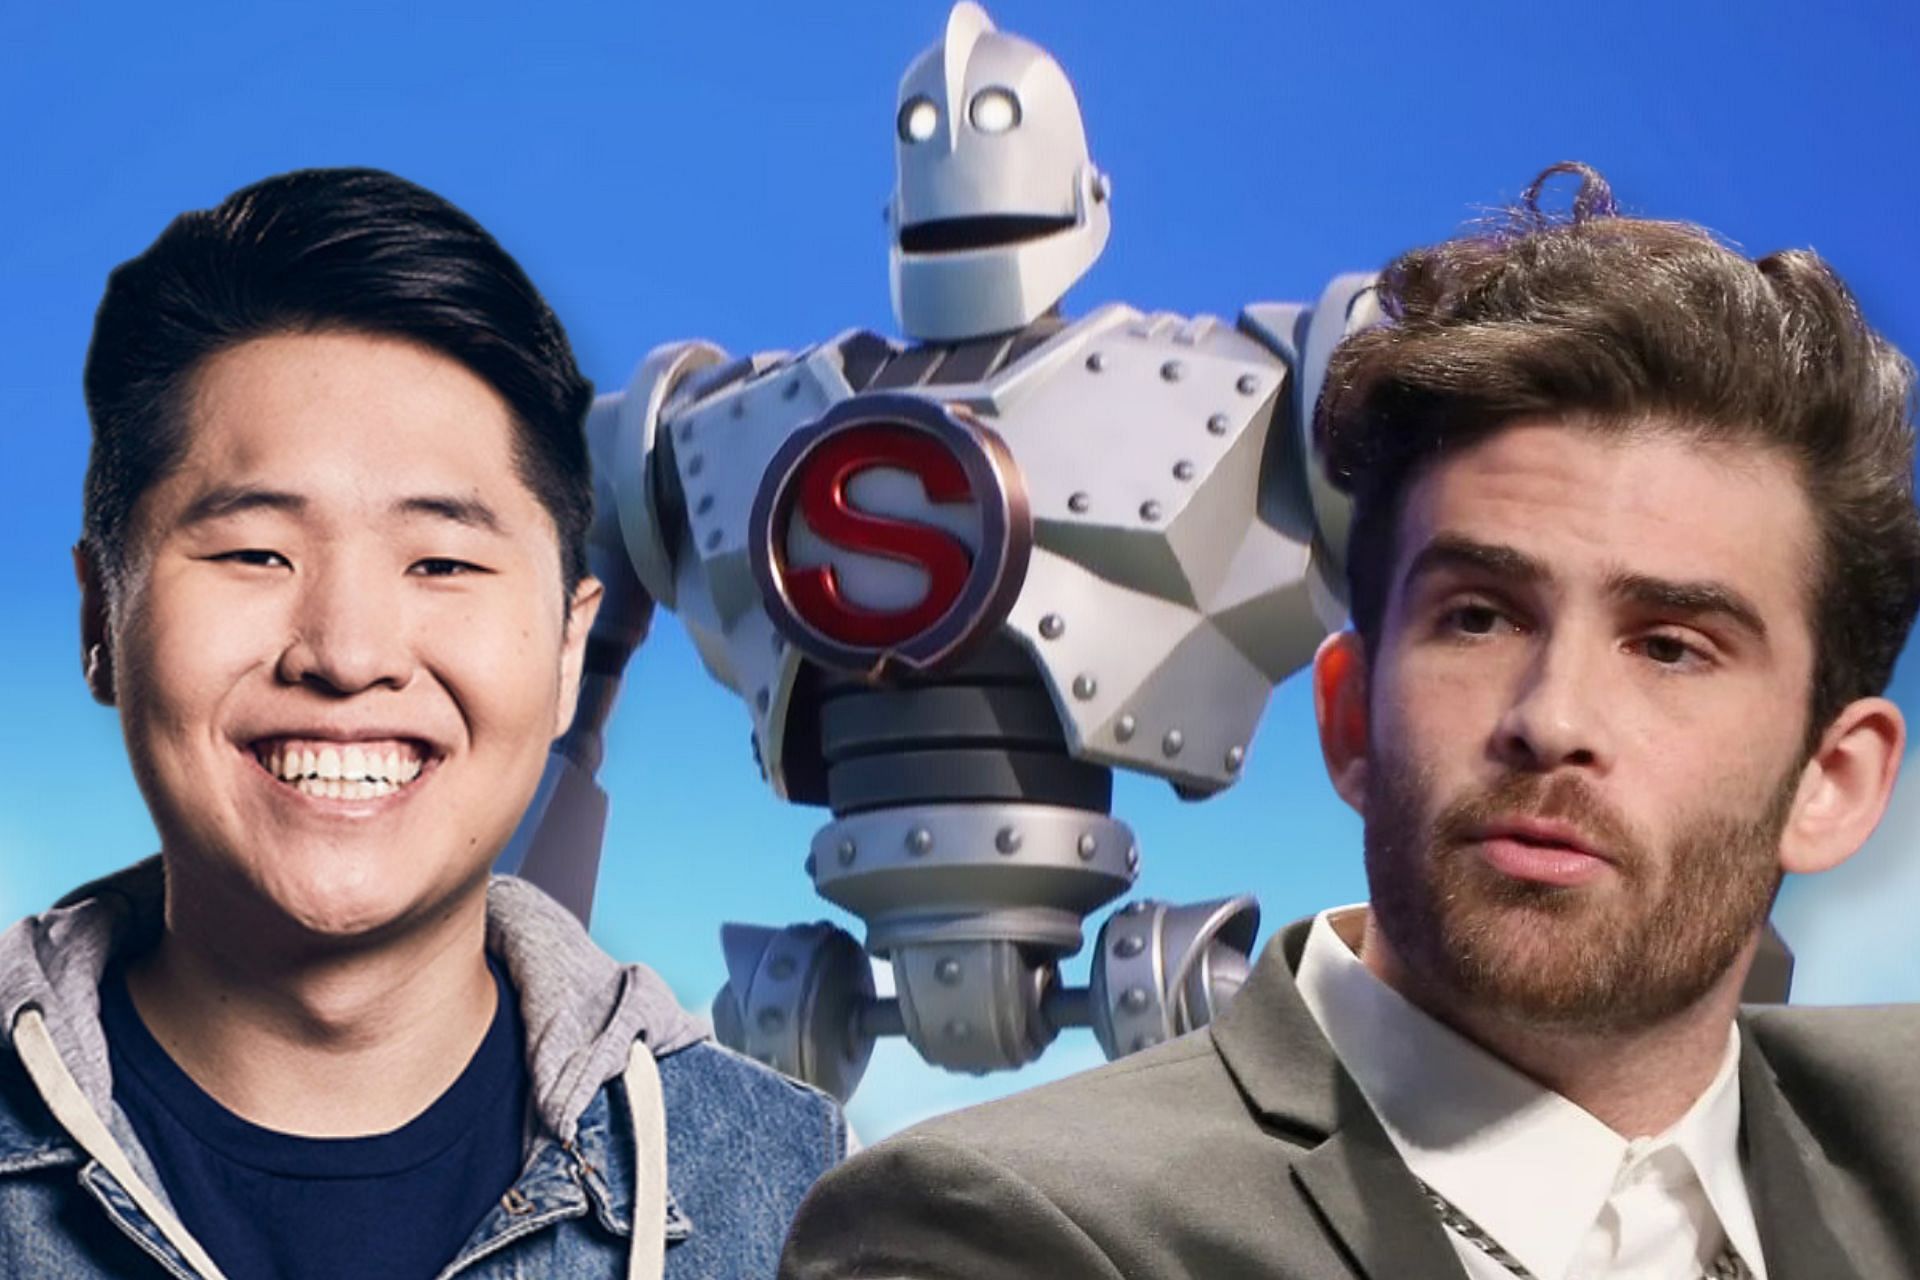 HasanAbi was not ready for Disguised Toast&rsquo;s Iron Giant gameplay (Image via Sportskeeda)